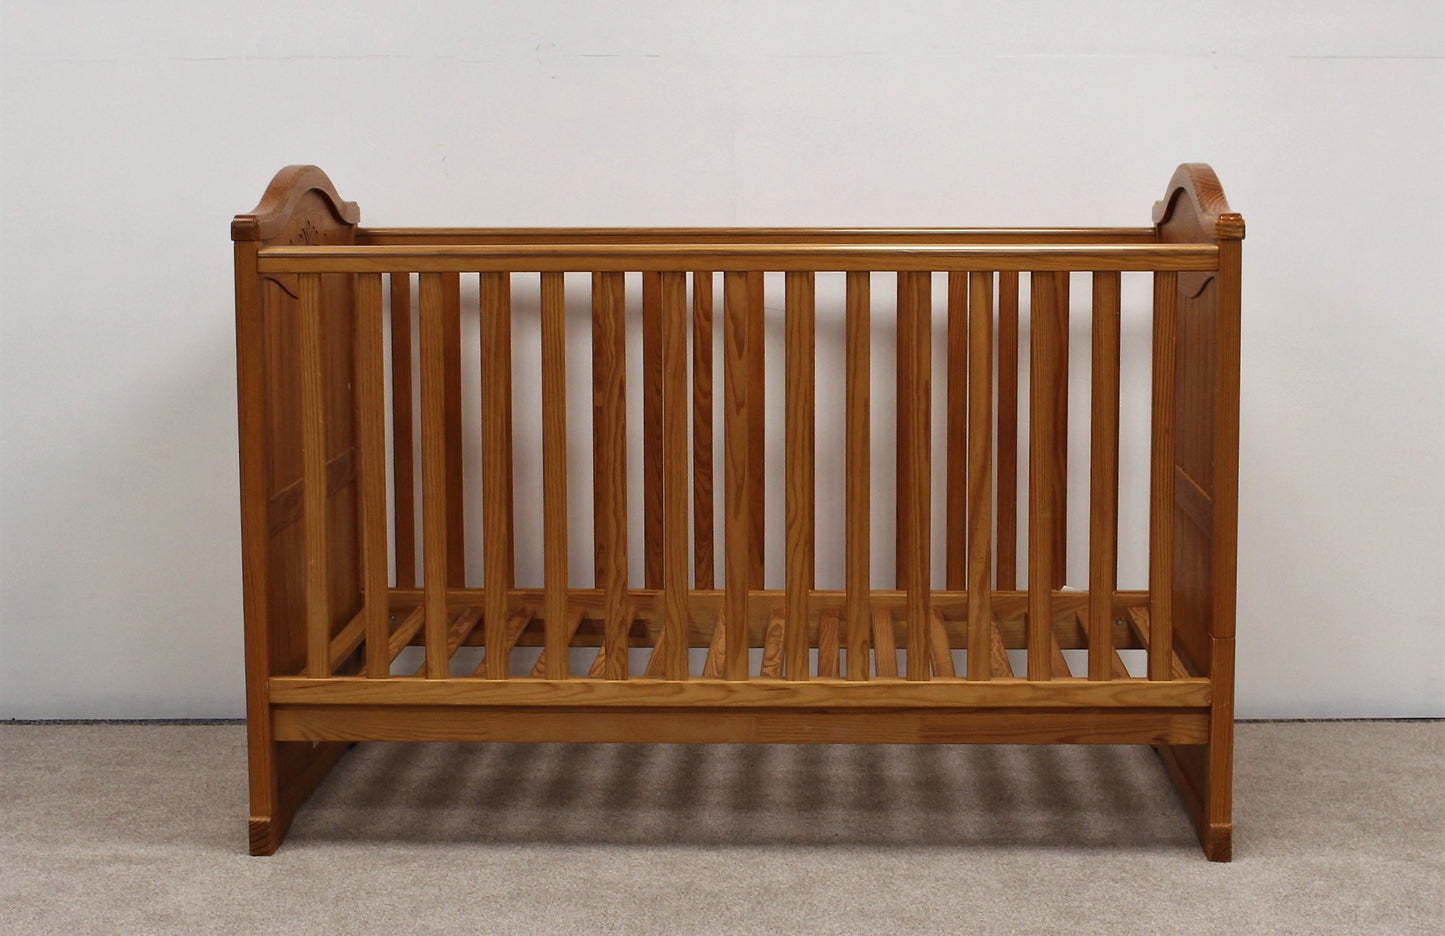 Wooden Cot by BebeCar